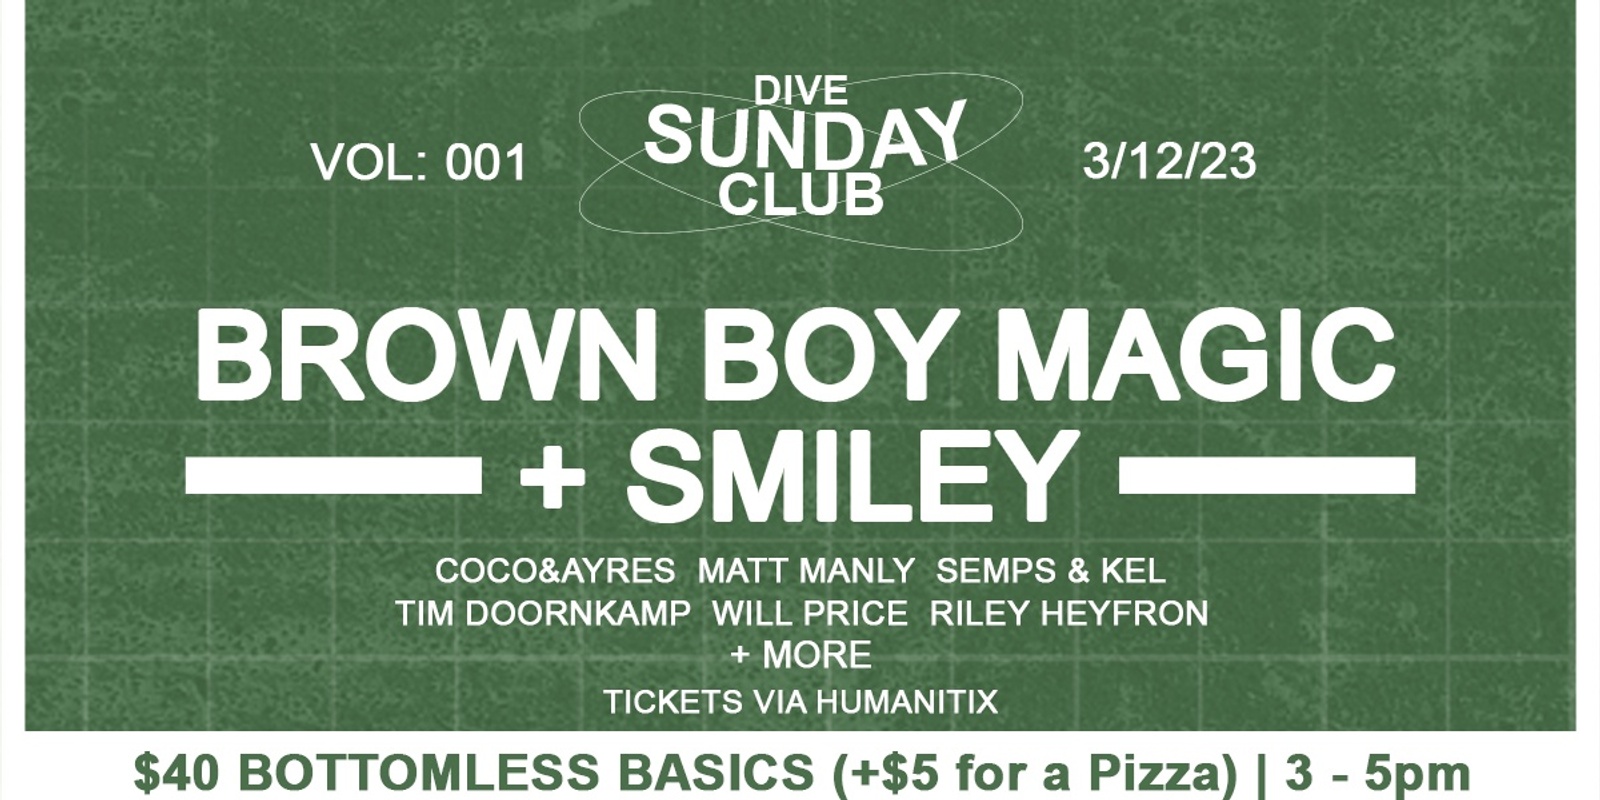 Banner image for DIVE SUNDAY CLUB: Brown Boy Magic + Smiley